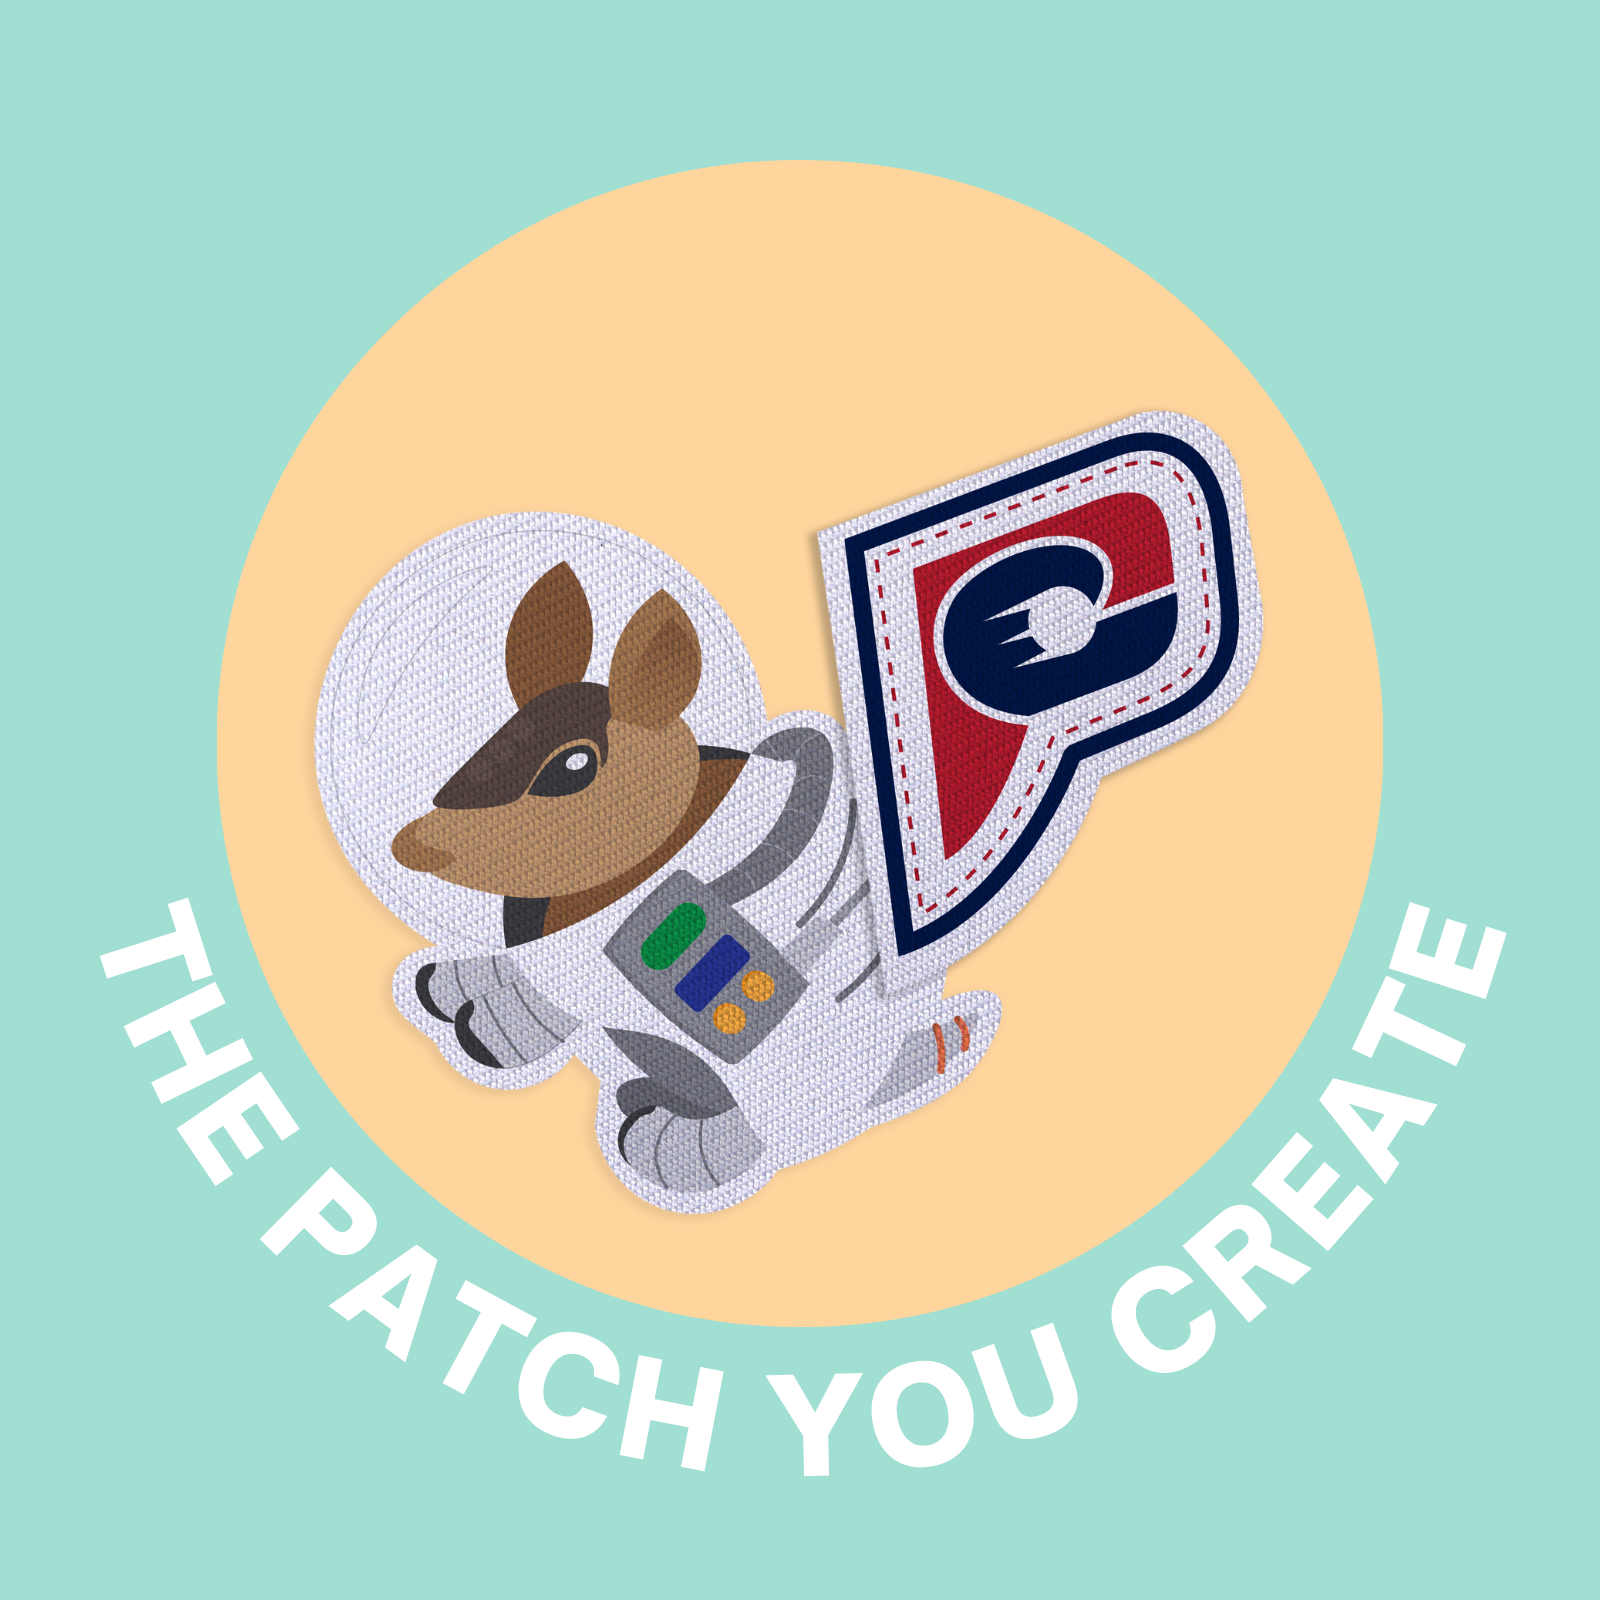 Album for Patches with inserts for various Space Programs